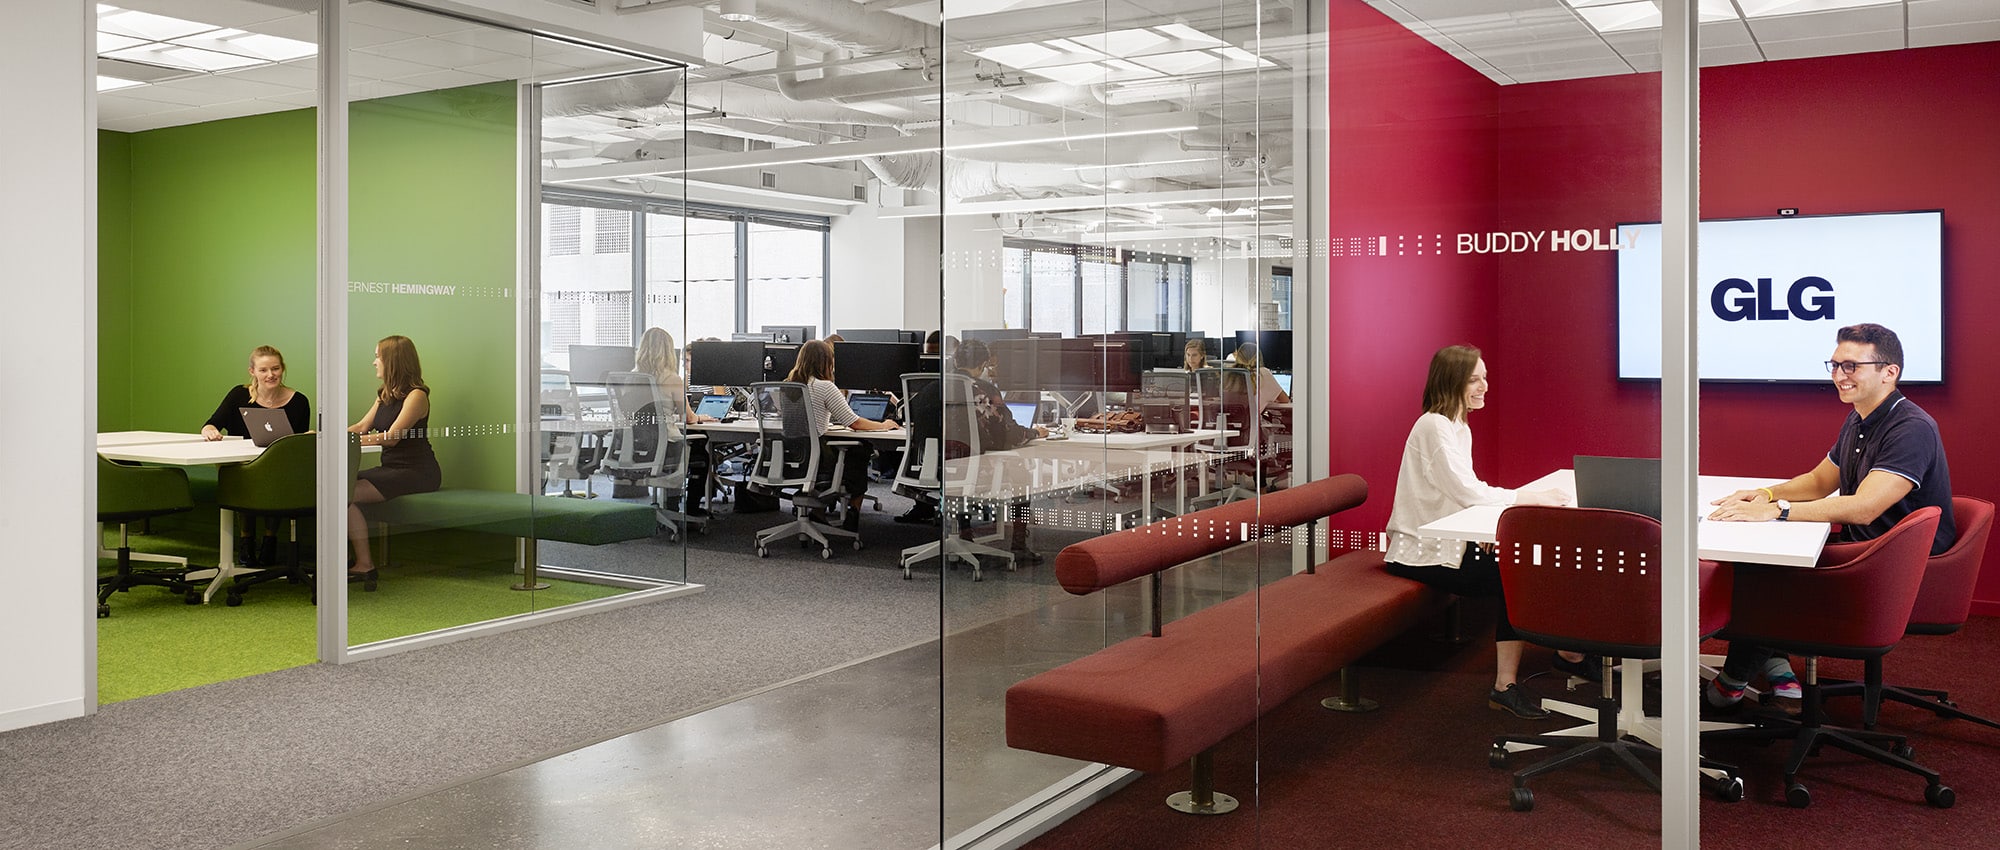 GLG Office Build Out in Austin, Texas by AQUILA Project Management